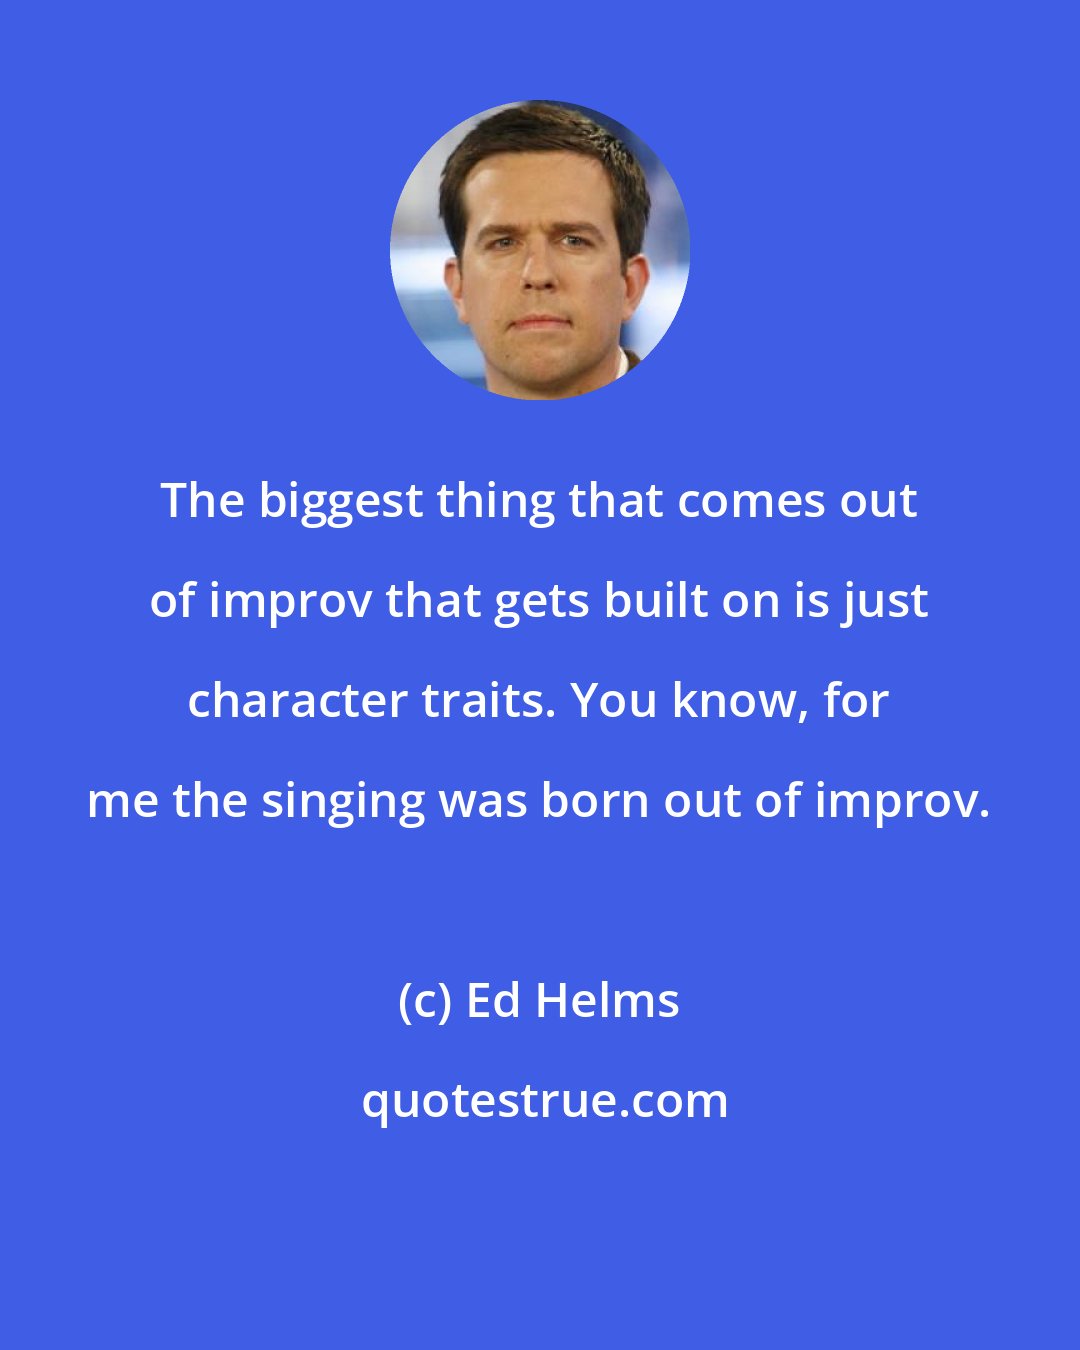 Ed Helms: The biggest thing that comes out of improv that gets built on is just character traits. You know, for me the singing was born out of improv.